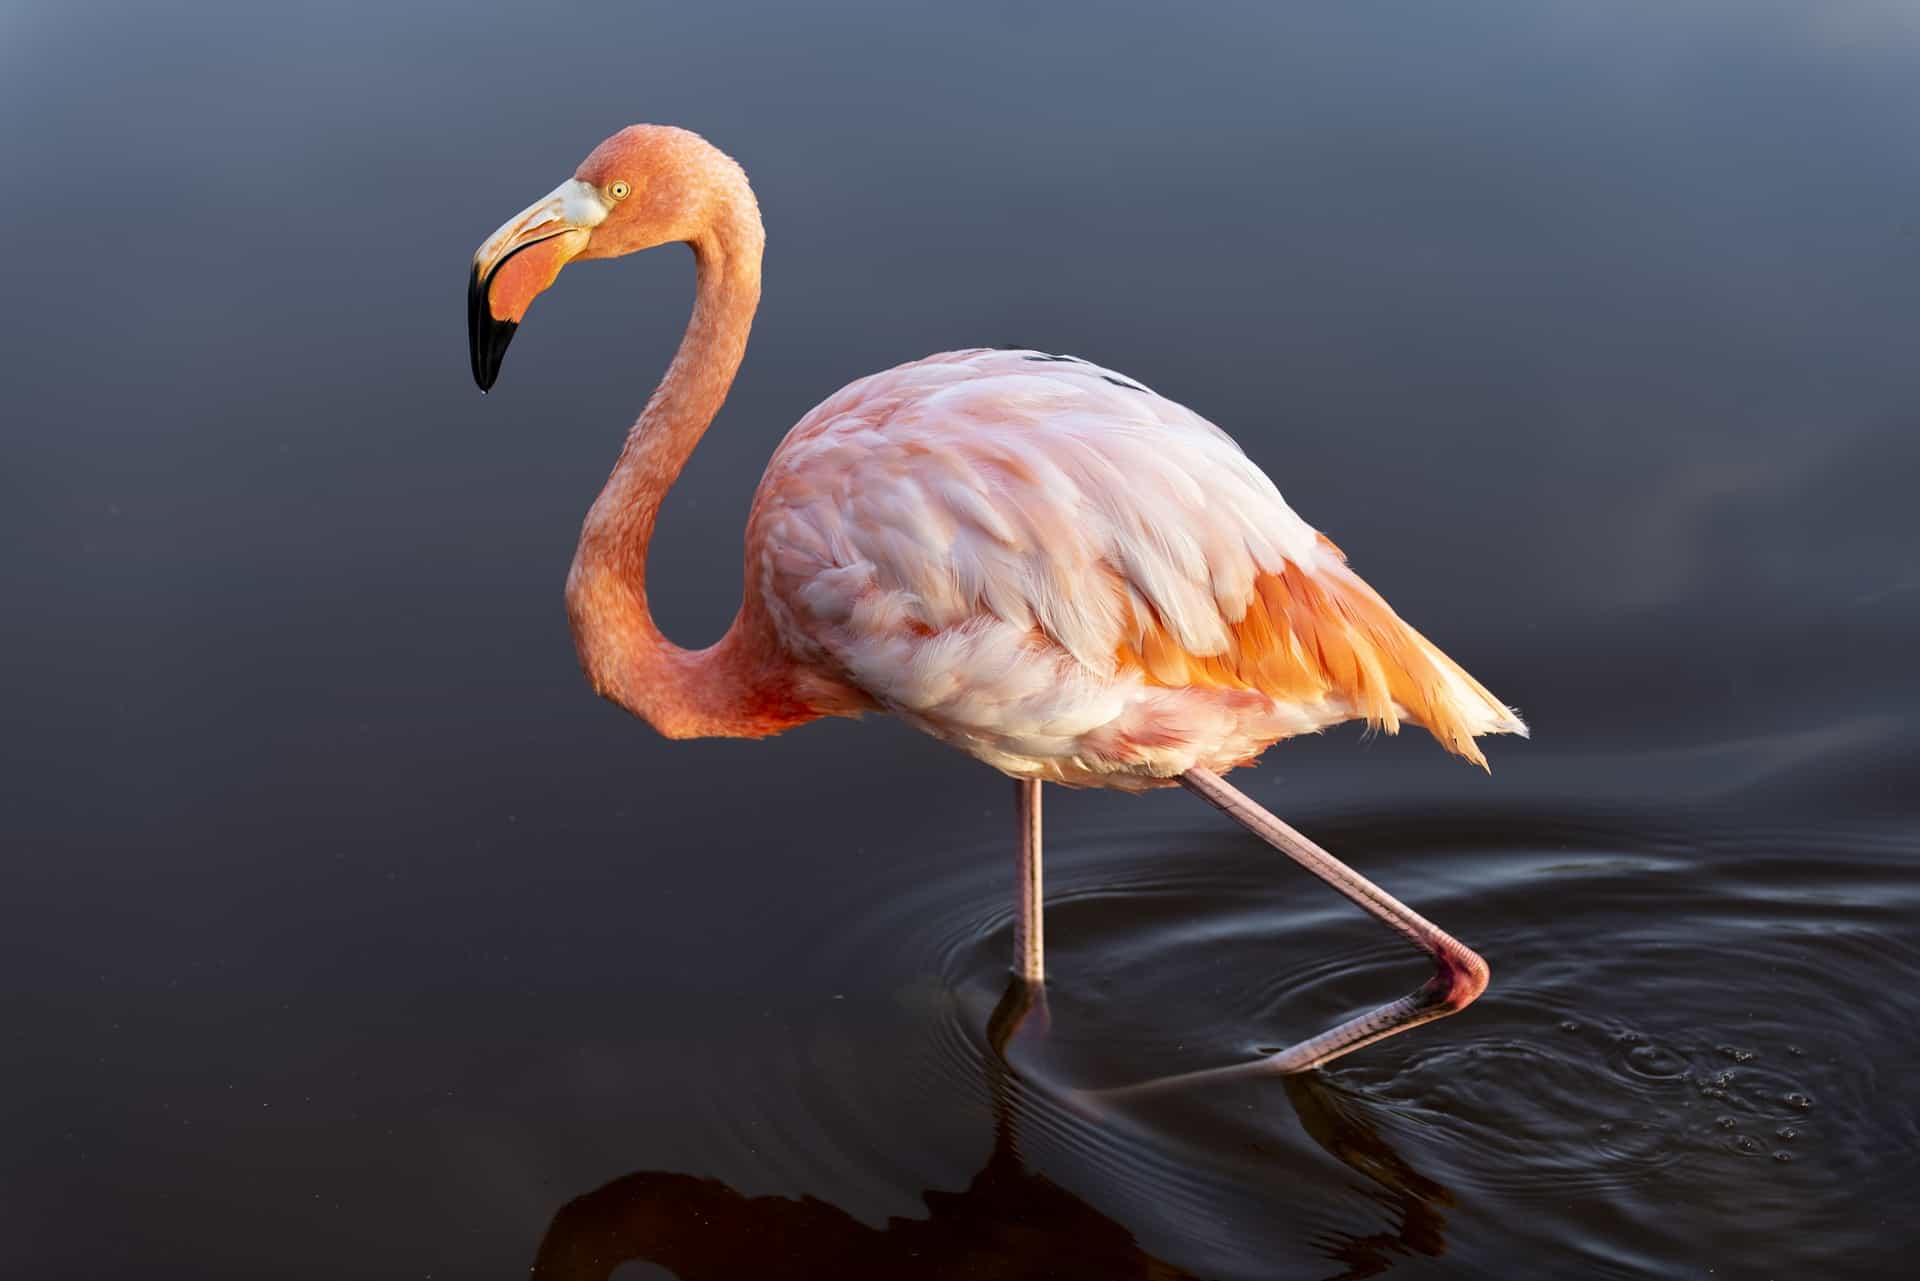 How Tall Are Flamingos? What Is The Size, Weight, etc of a Flamingo?